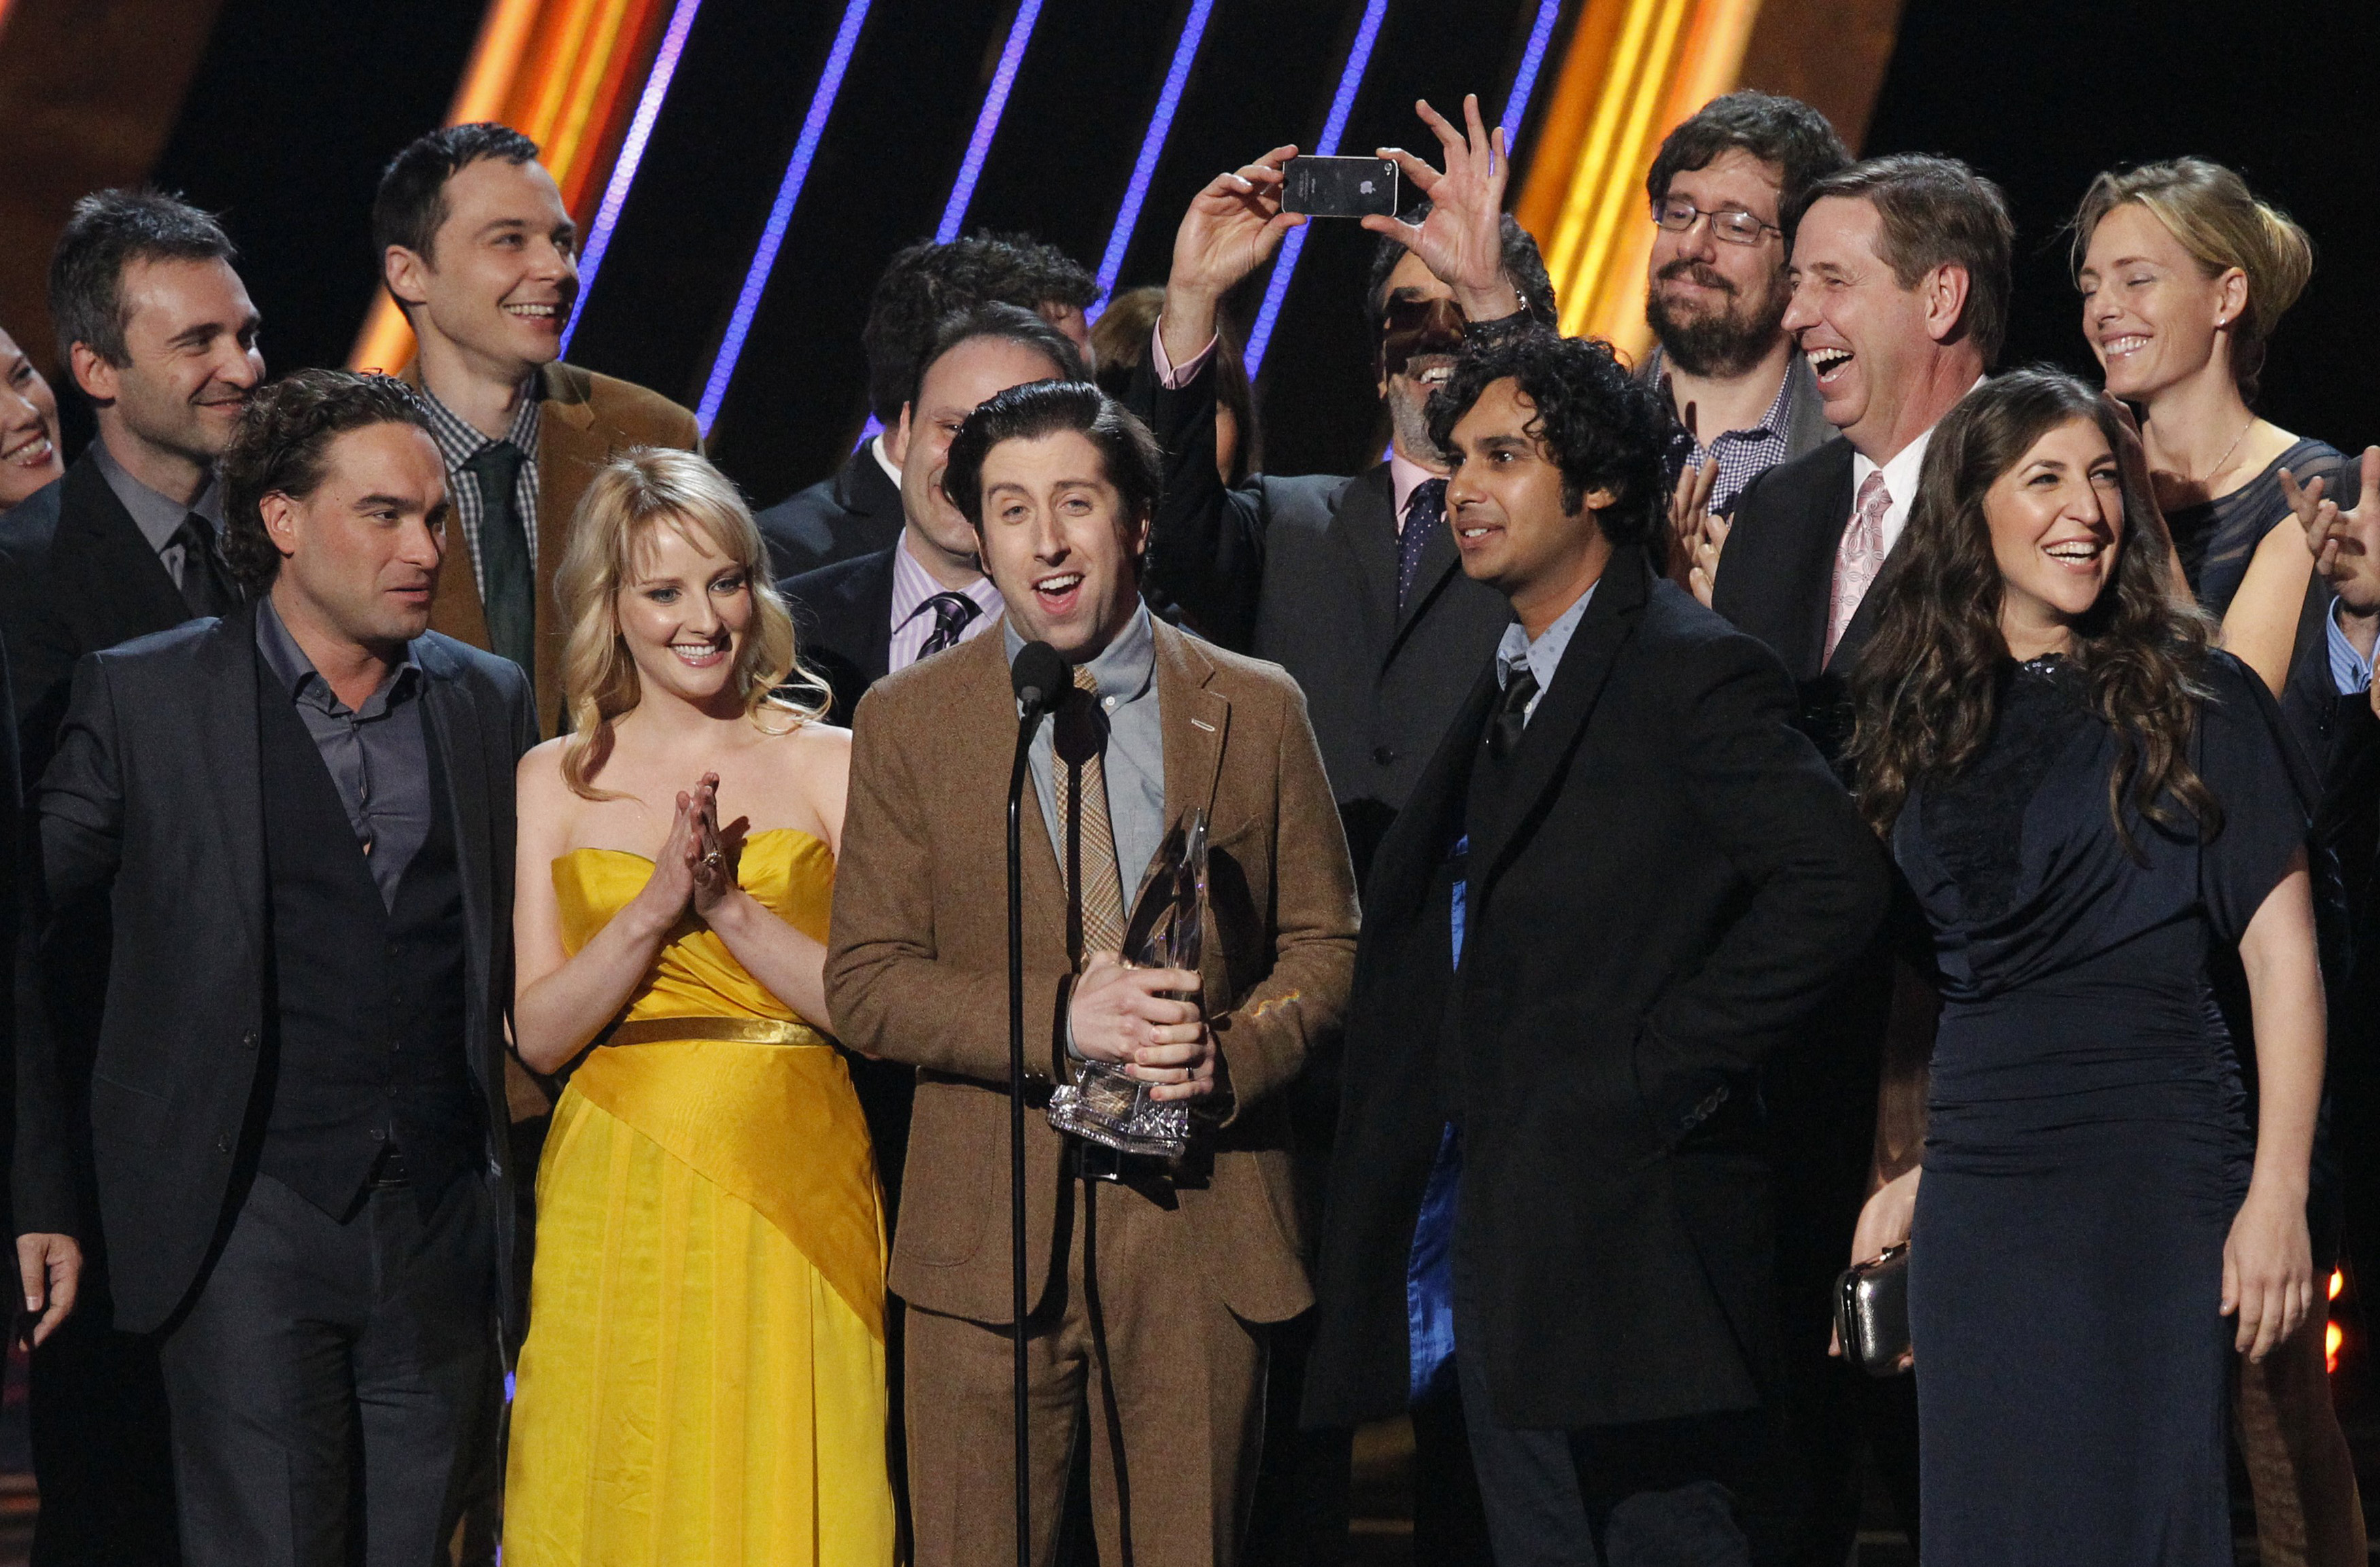 The cast of "The Big Bang Theory" accept the award for "Favorite Network TV Comedy" at the 2013 People's Choice Awards in Los Angeles